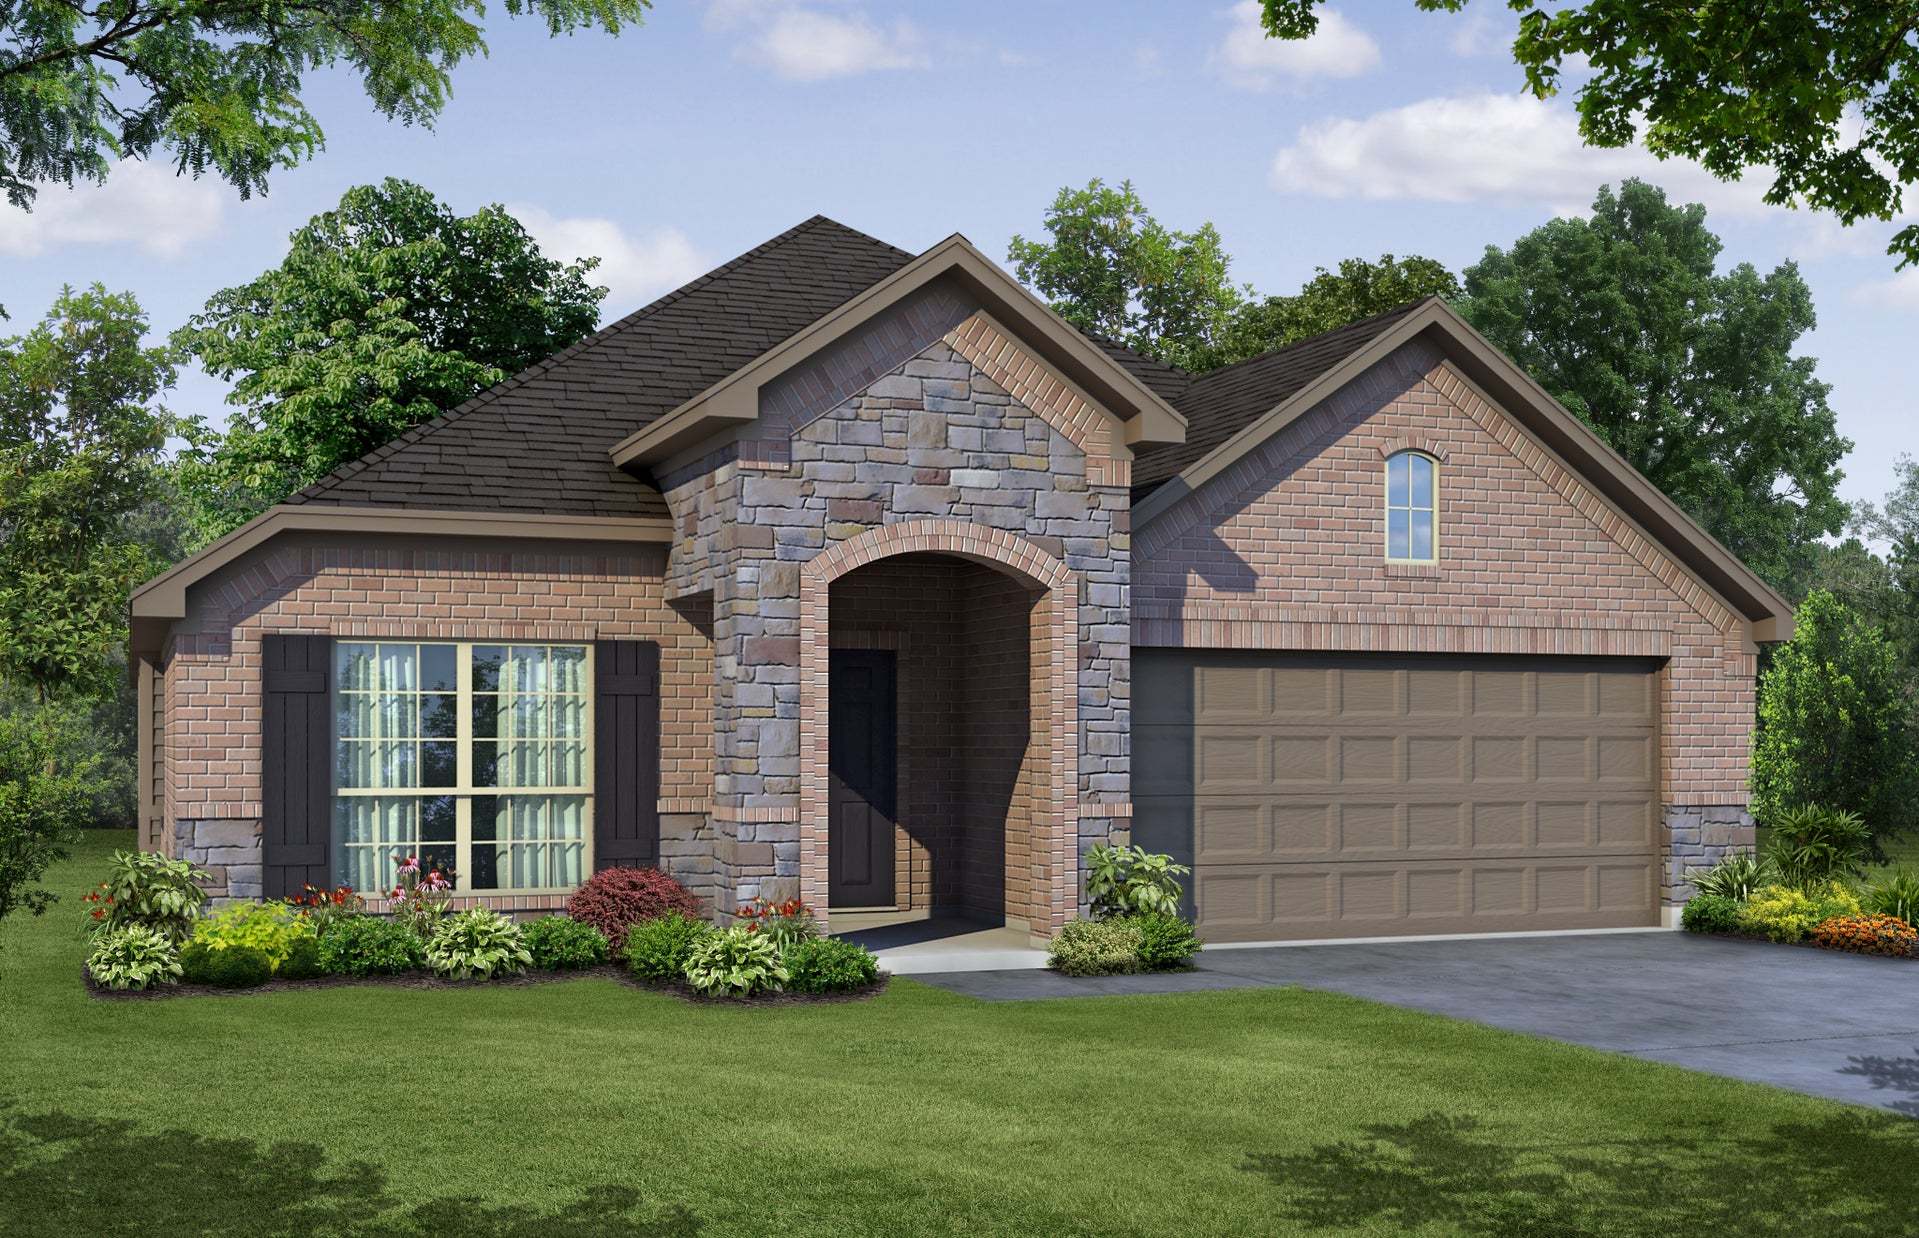 Exterior:2065 A with Stone